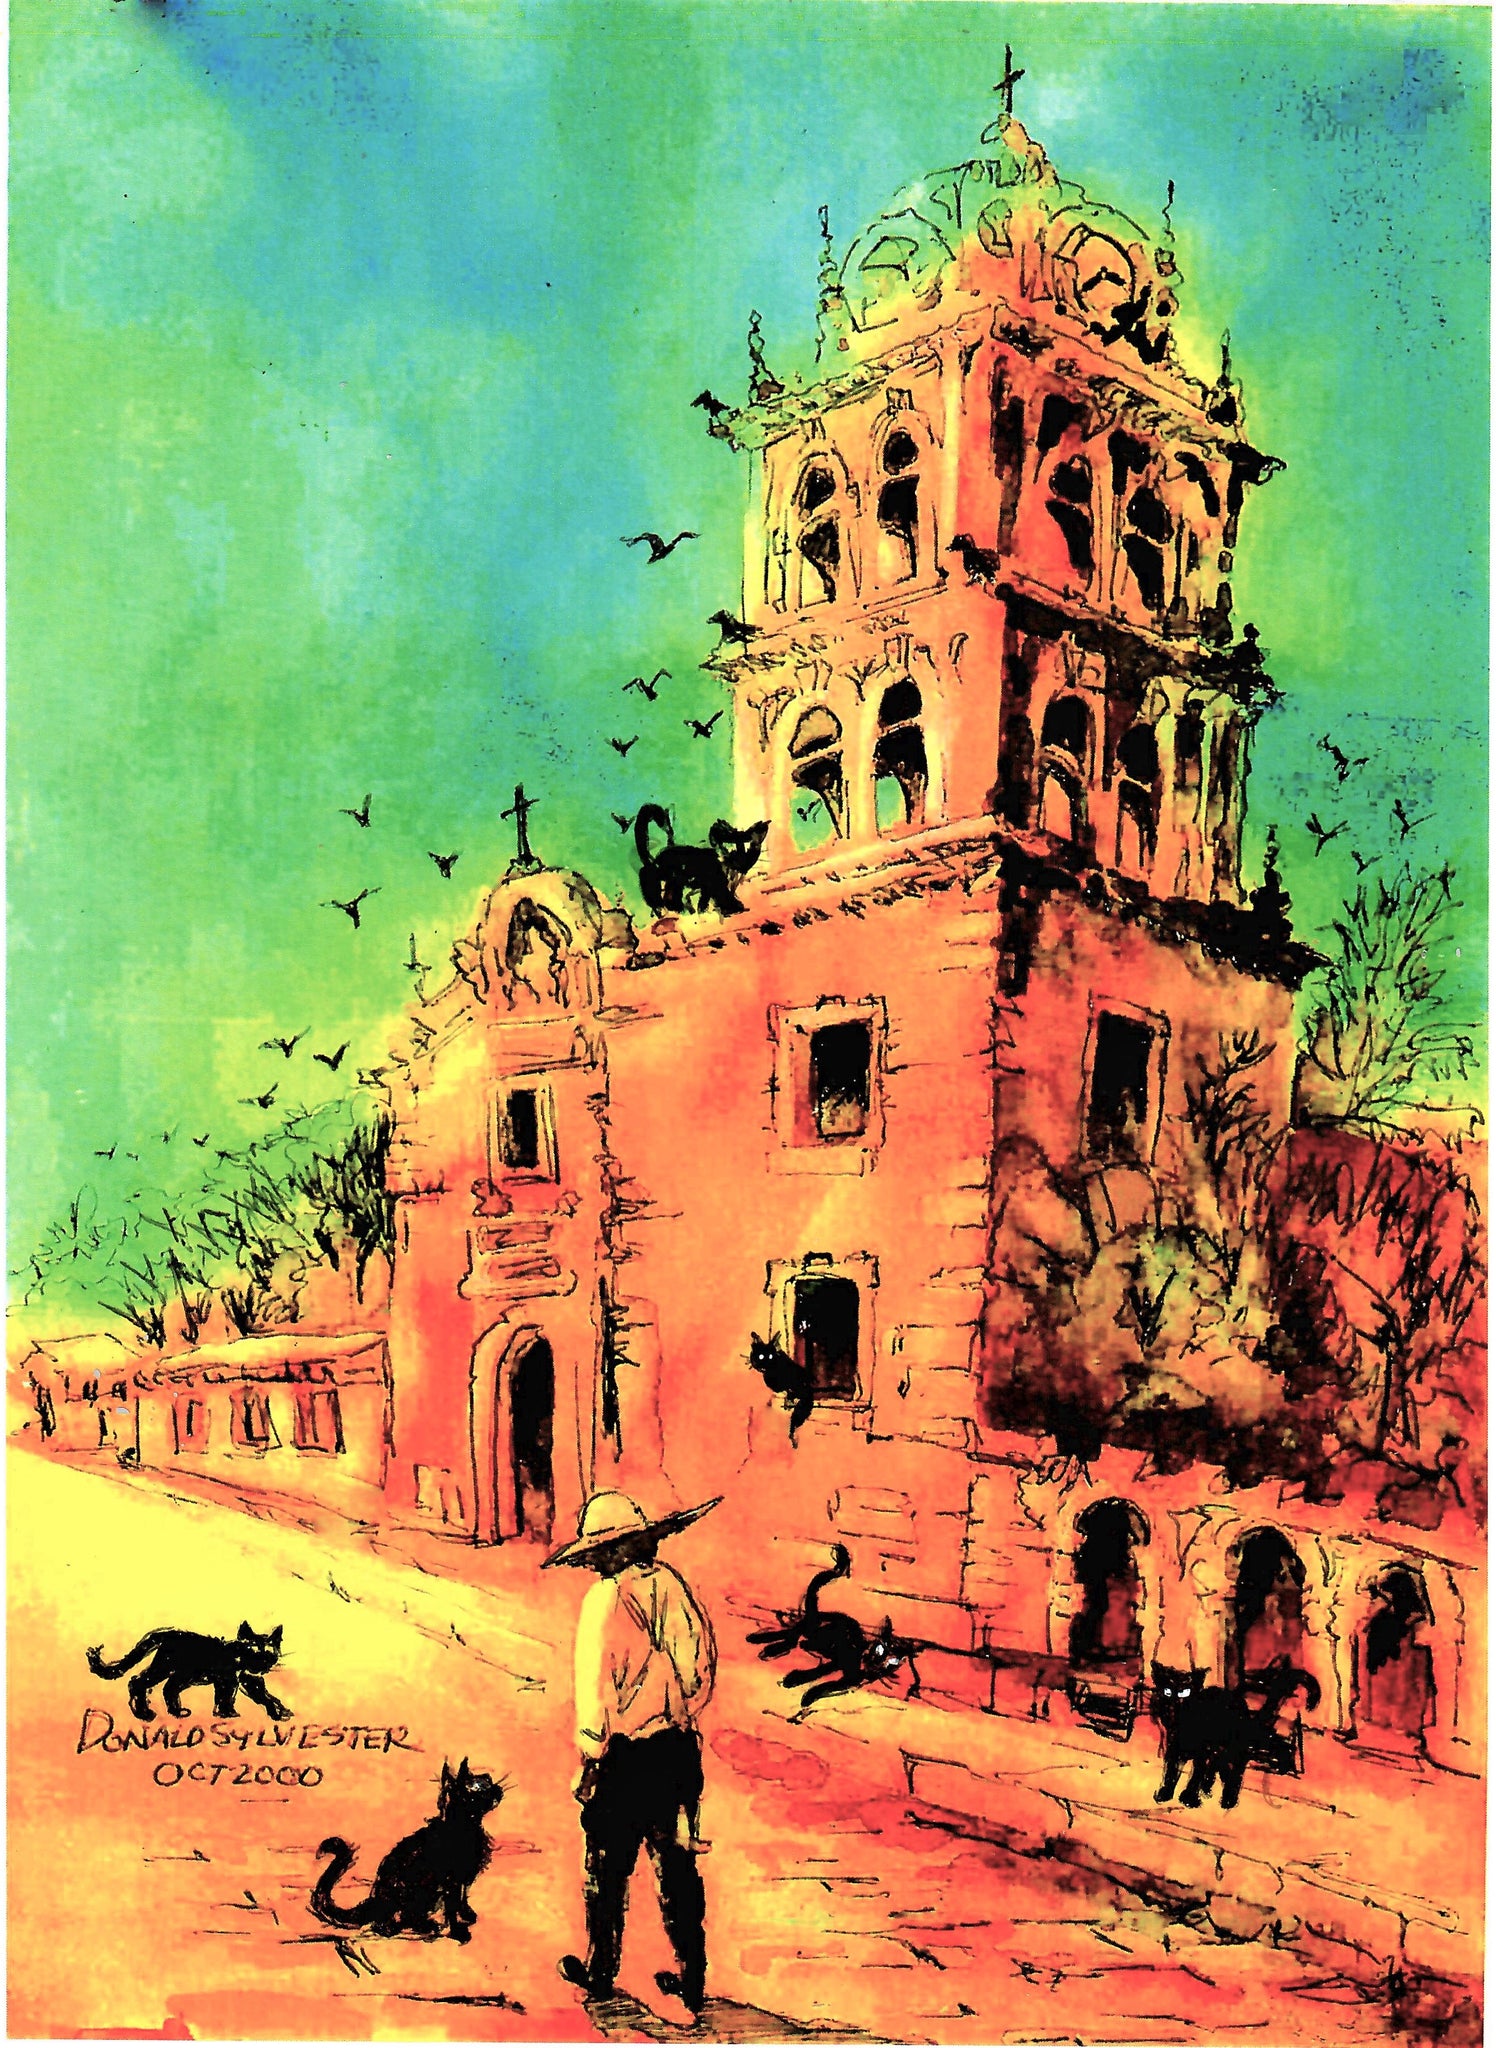 Cats Around A Mexican Cathedral And Walking Man In The Street